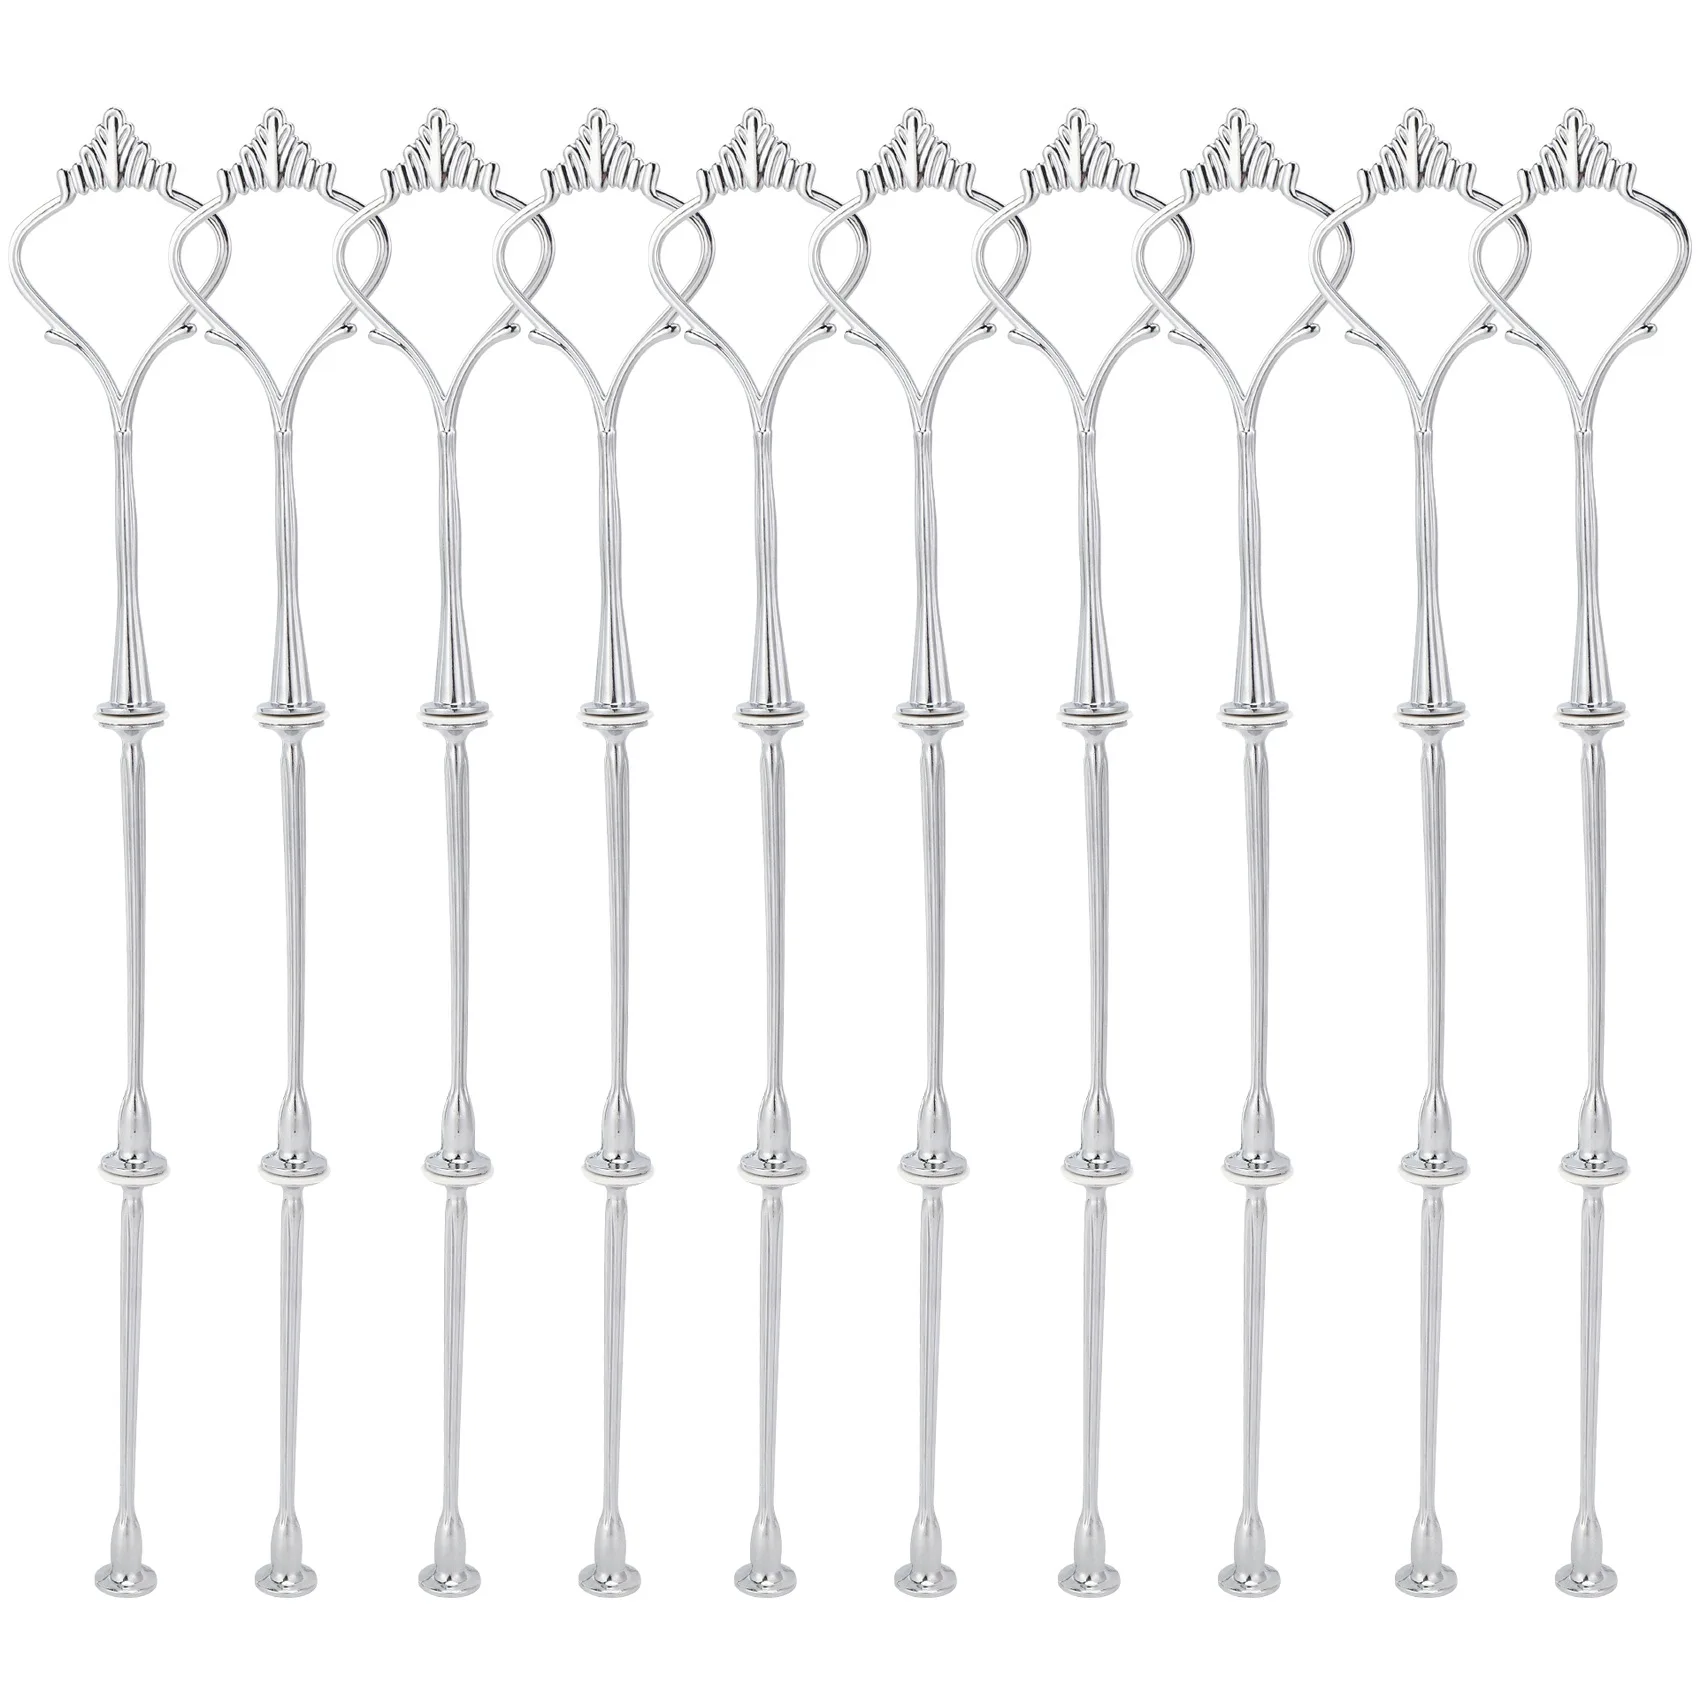 

10 x Sets 2 or 3 Tier Cake Plate Stand Fittings Silver Plate Stands New